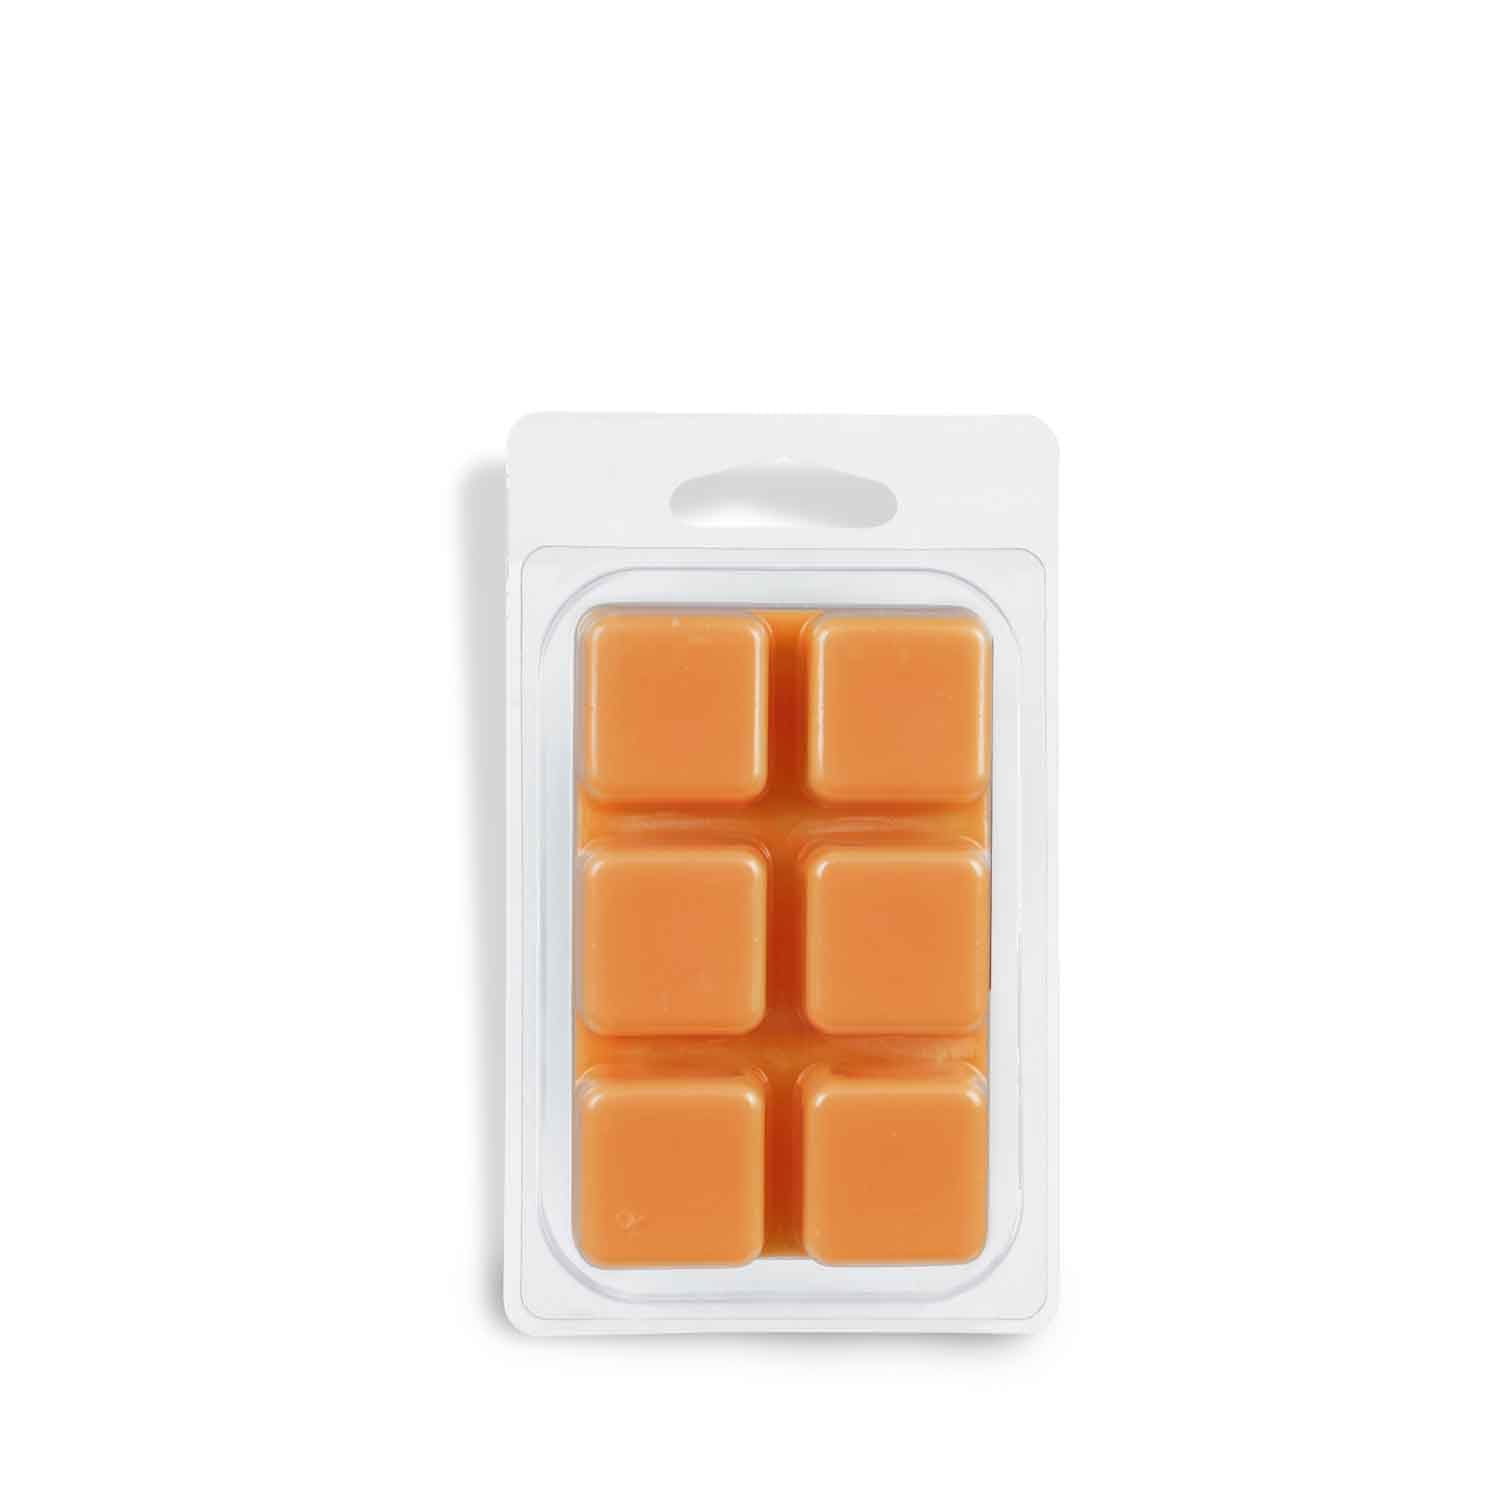 Pumpkin Spice wax melt tart bars are a great alternative to scented candles when you can't have a flame